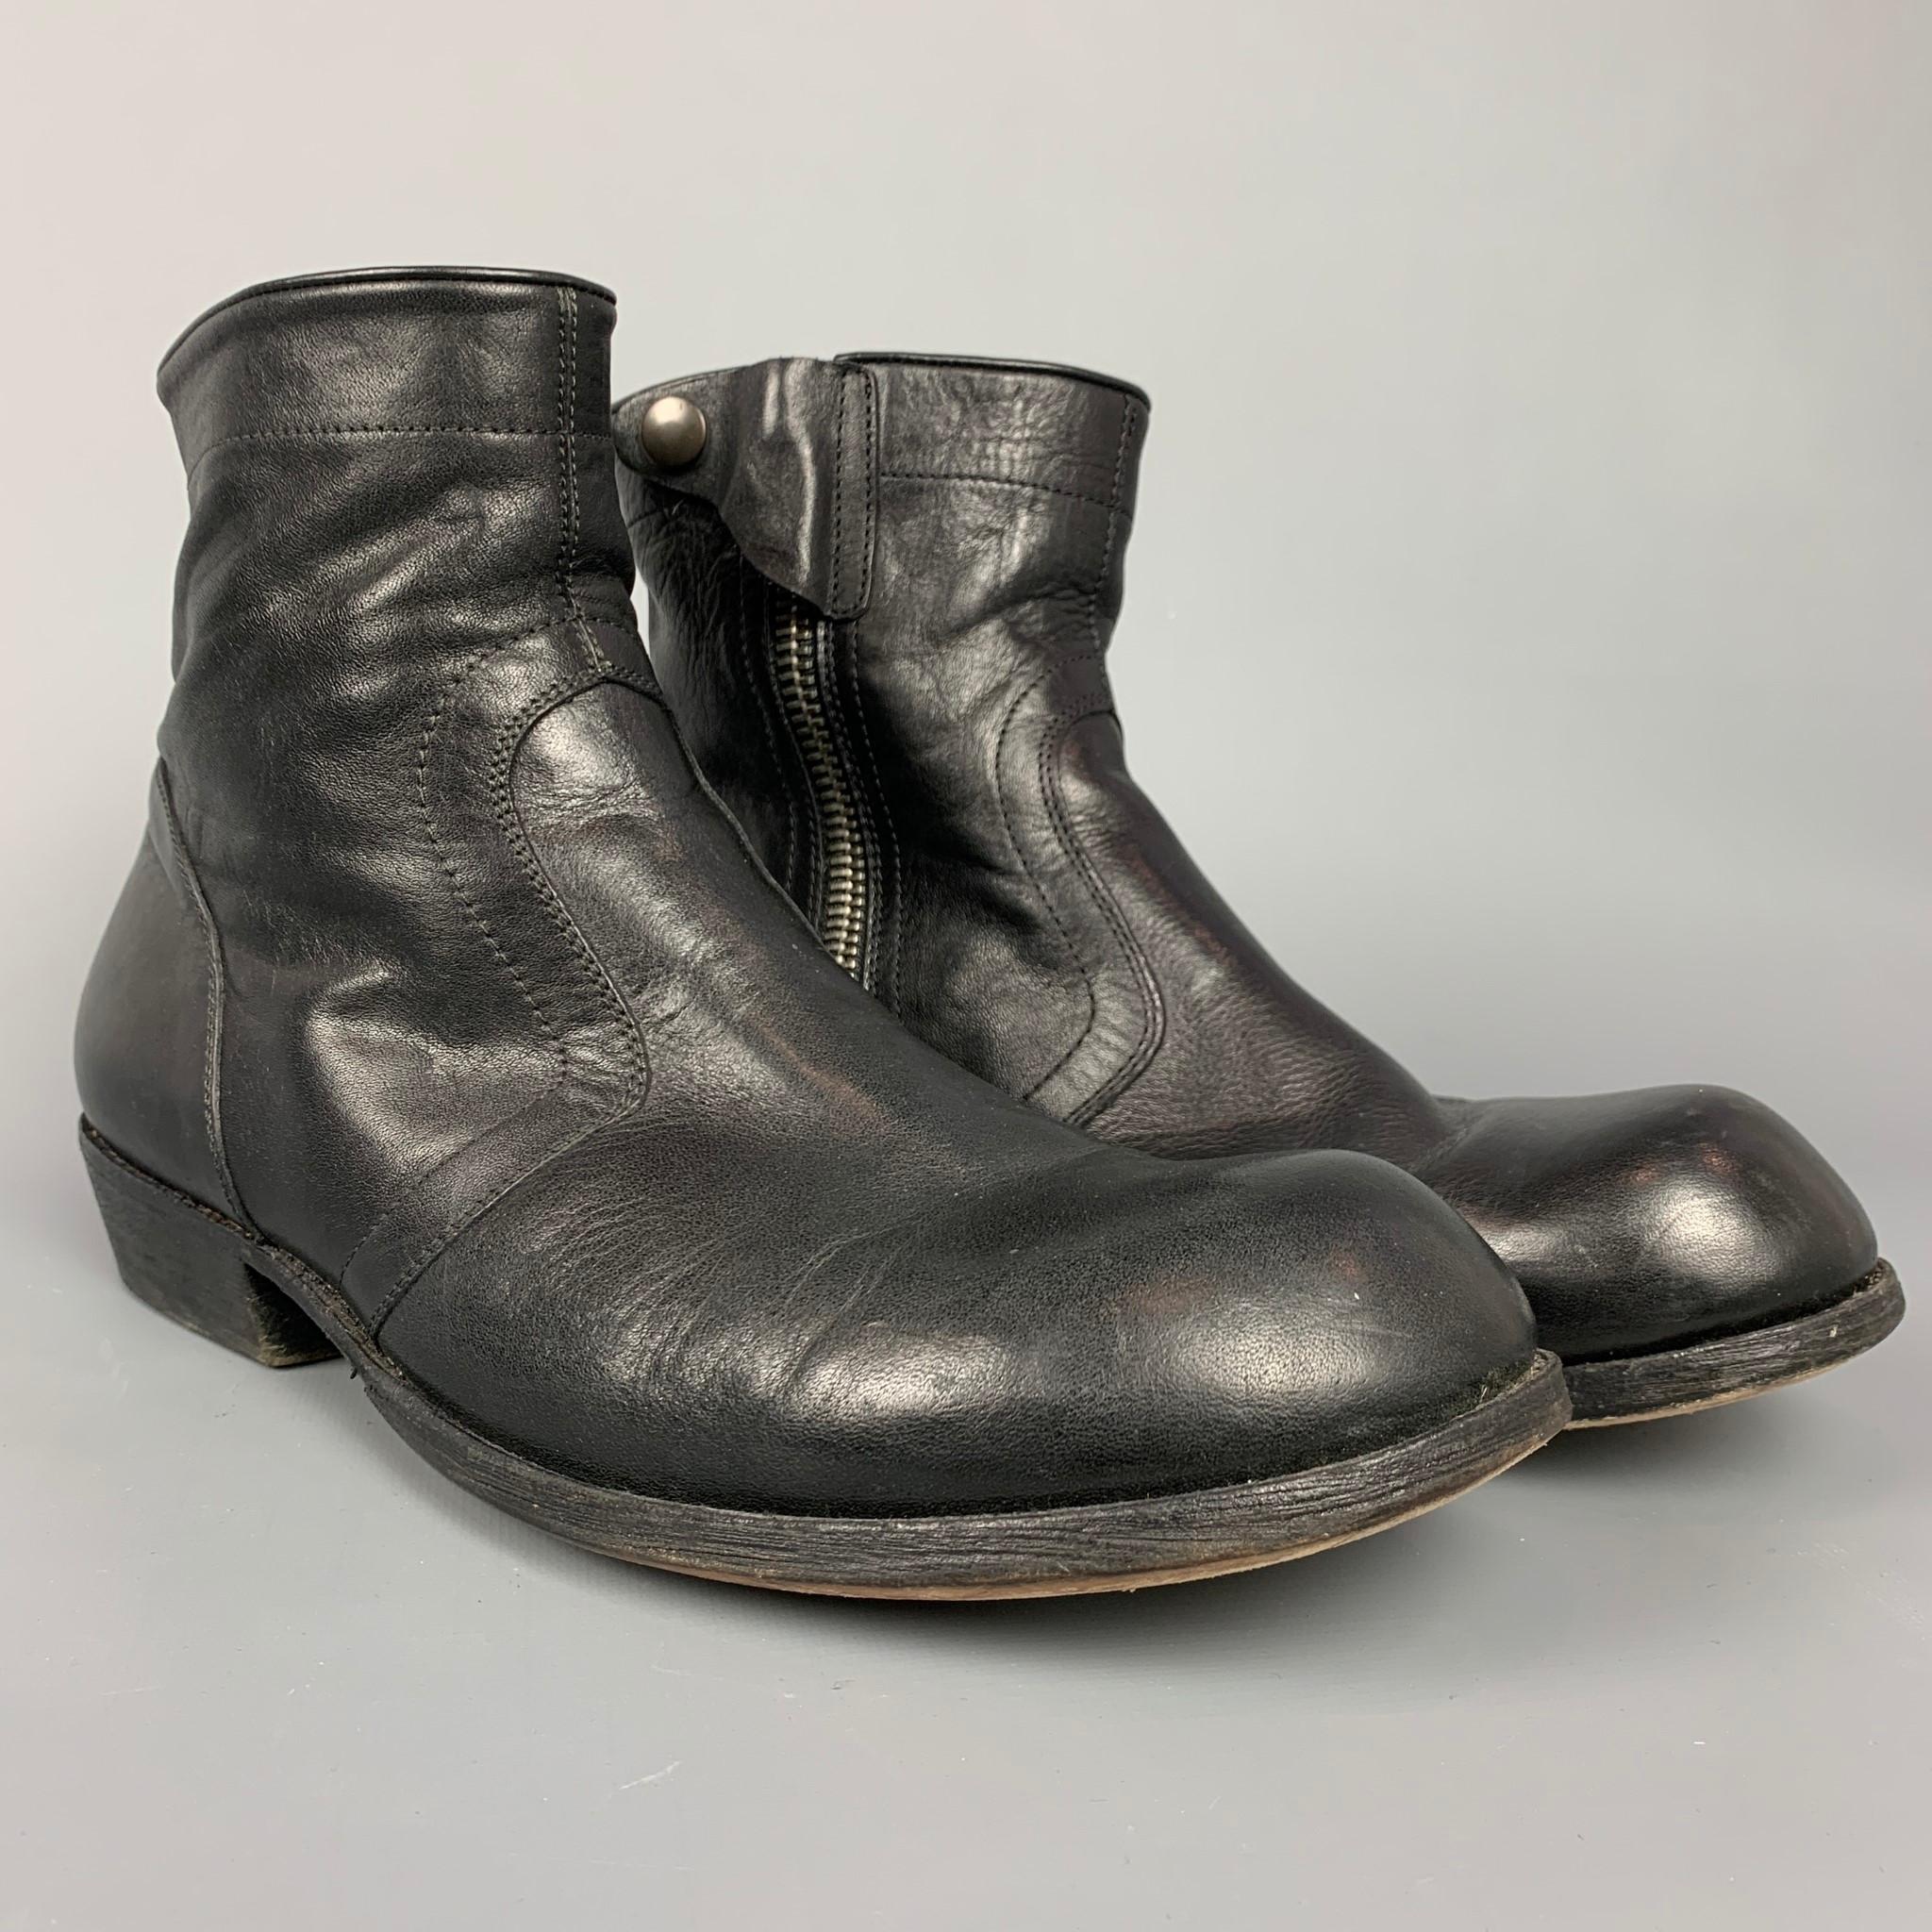 RICK OWENS boots comes in a black leather featuring a round toe, top stitching, snap button detail, and a side zipper closure. Made in Italy.

Very Good Pre-Owned Condition.
Marked: 44

Measurements:

Length: 11.5 in.
Width: 4 in.
Height: 7 in. 